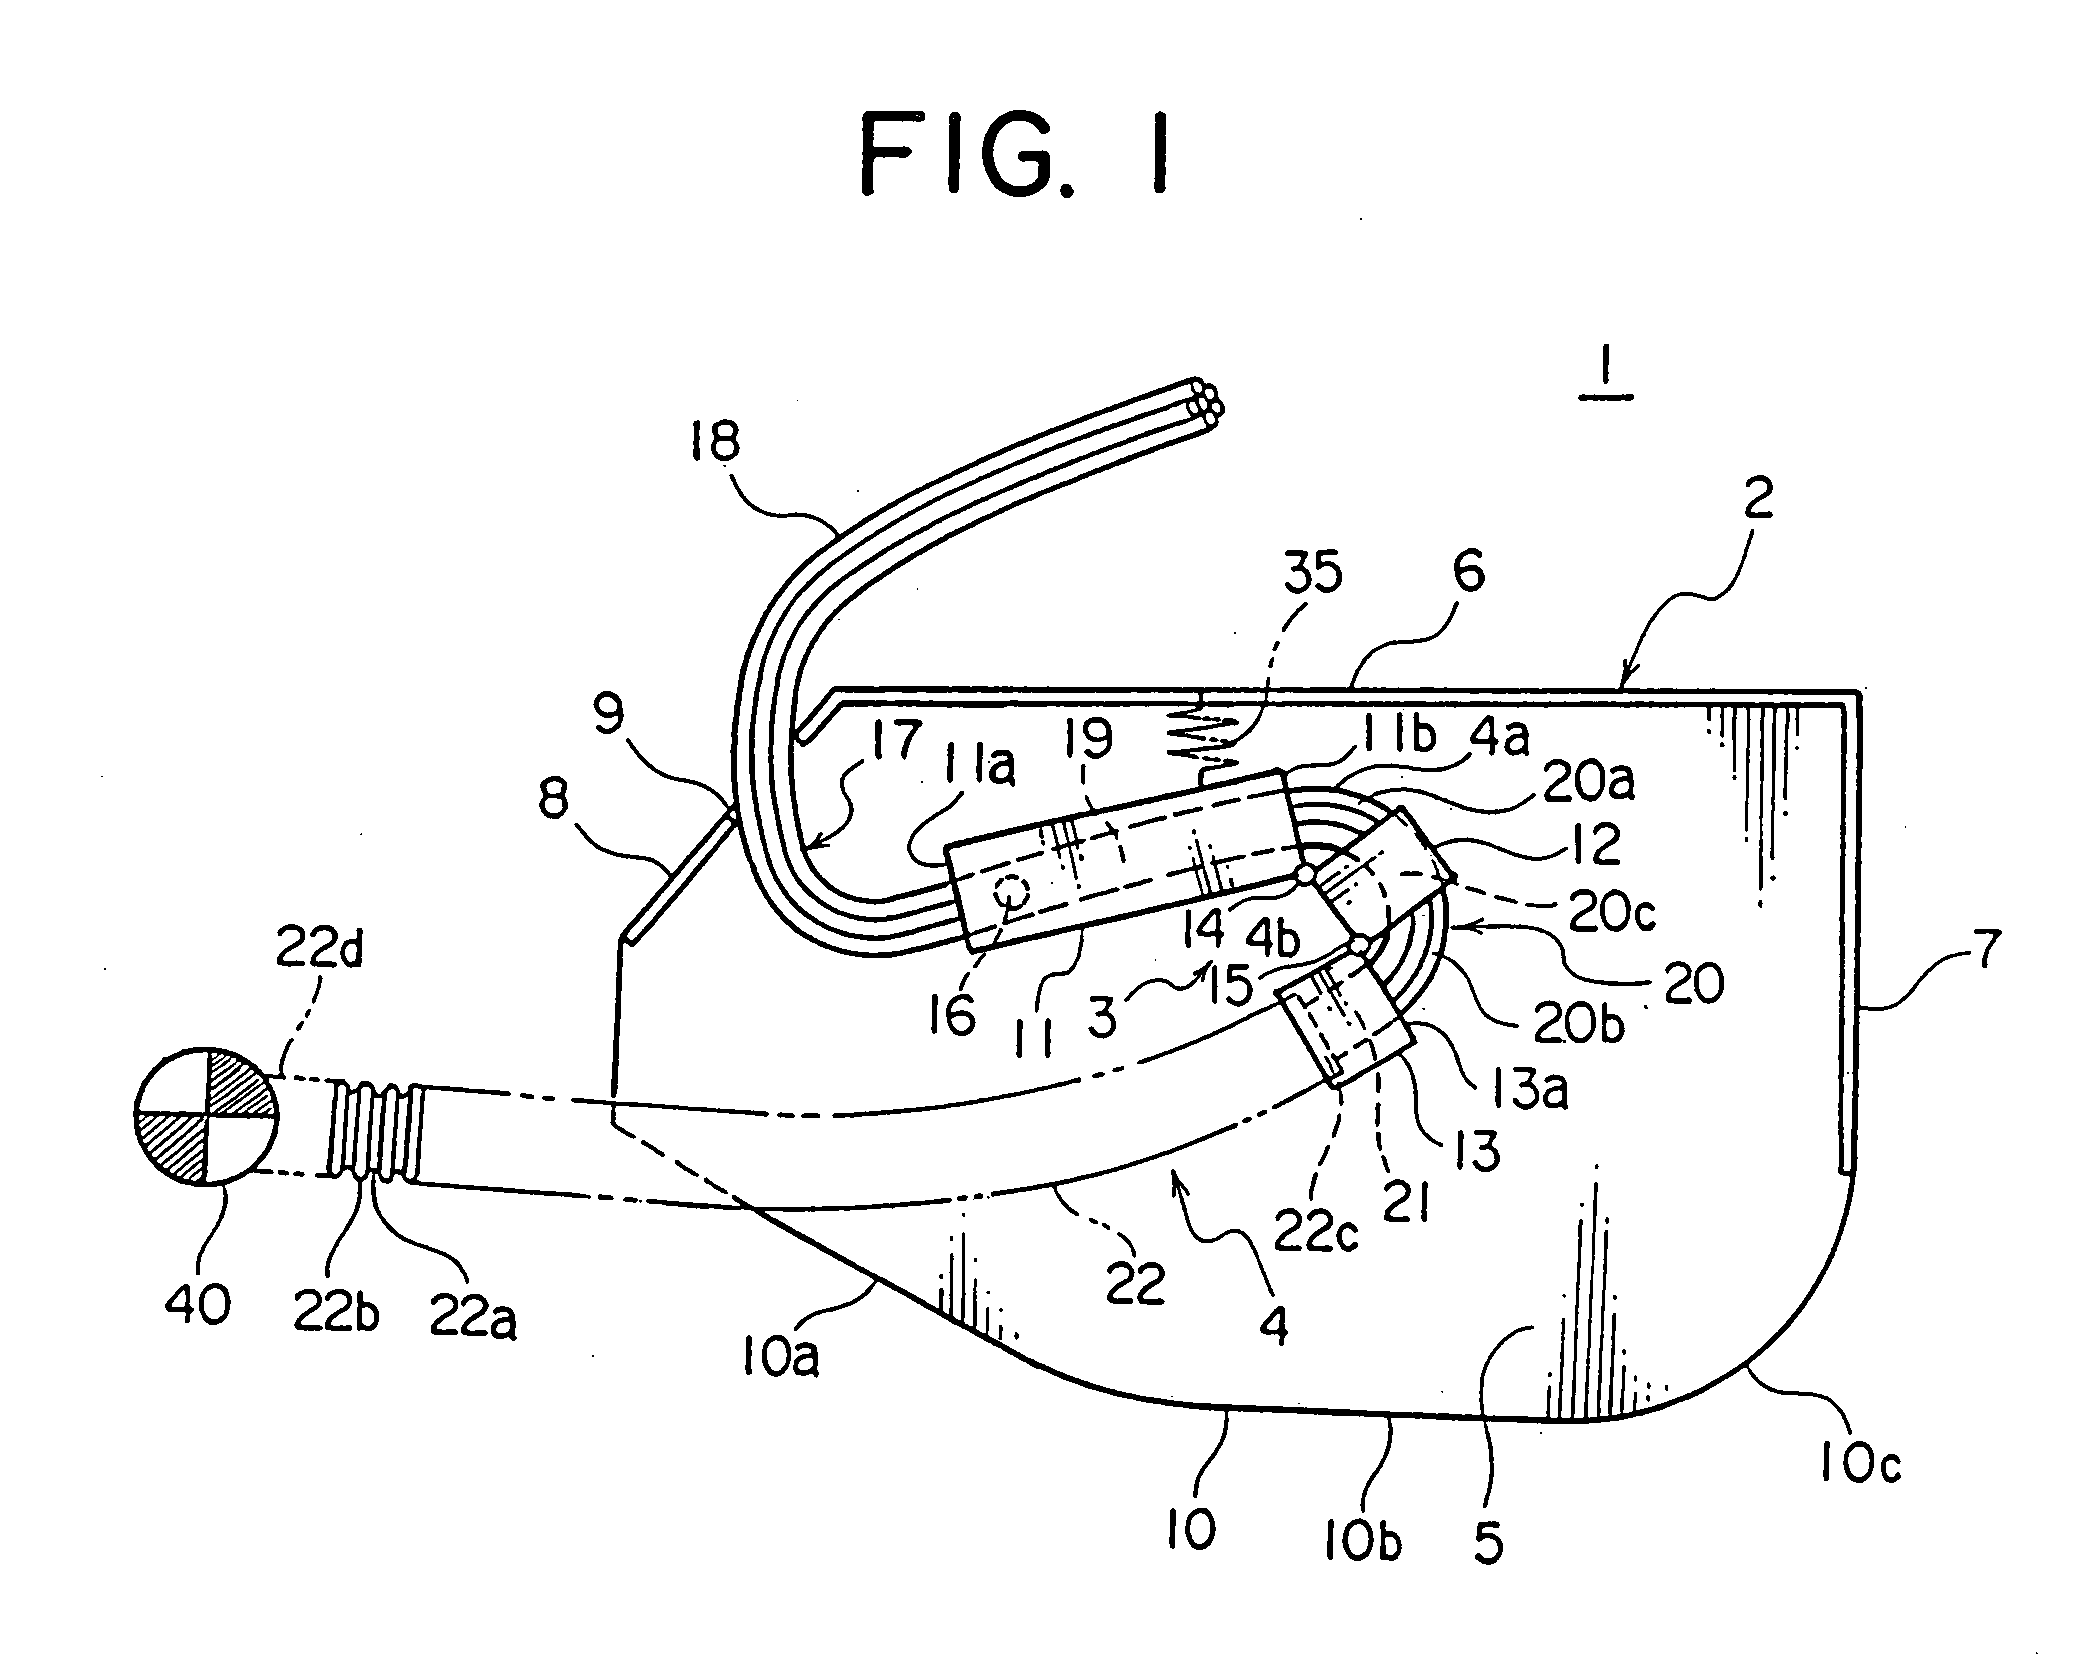 Apparatus for holding wire harness